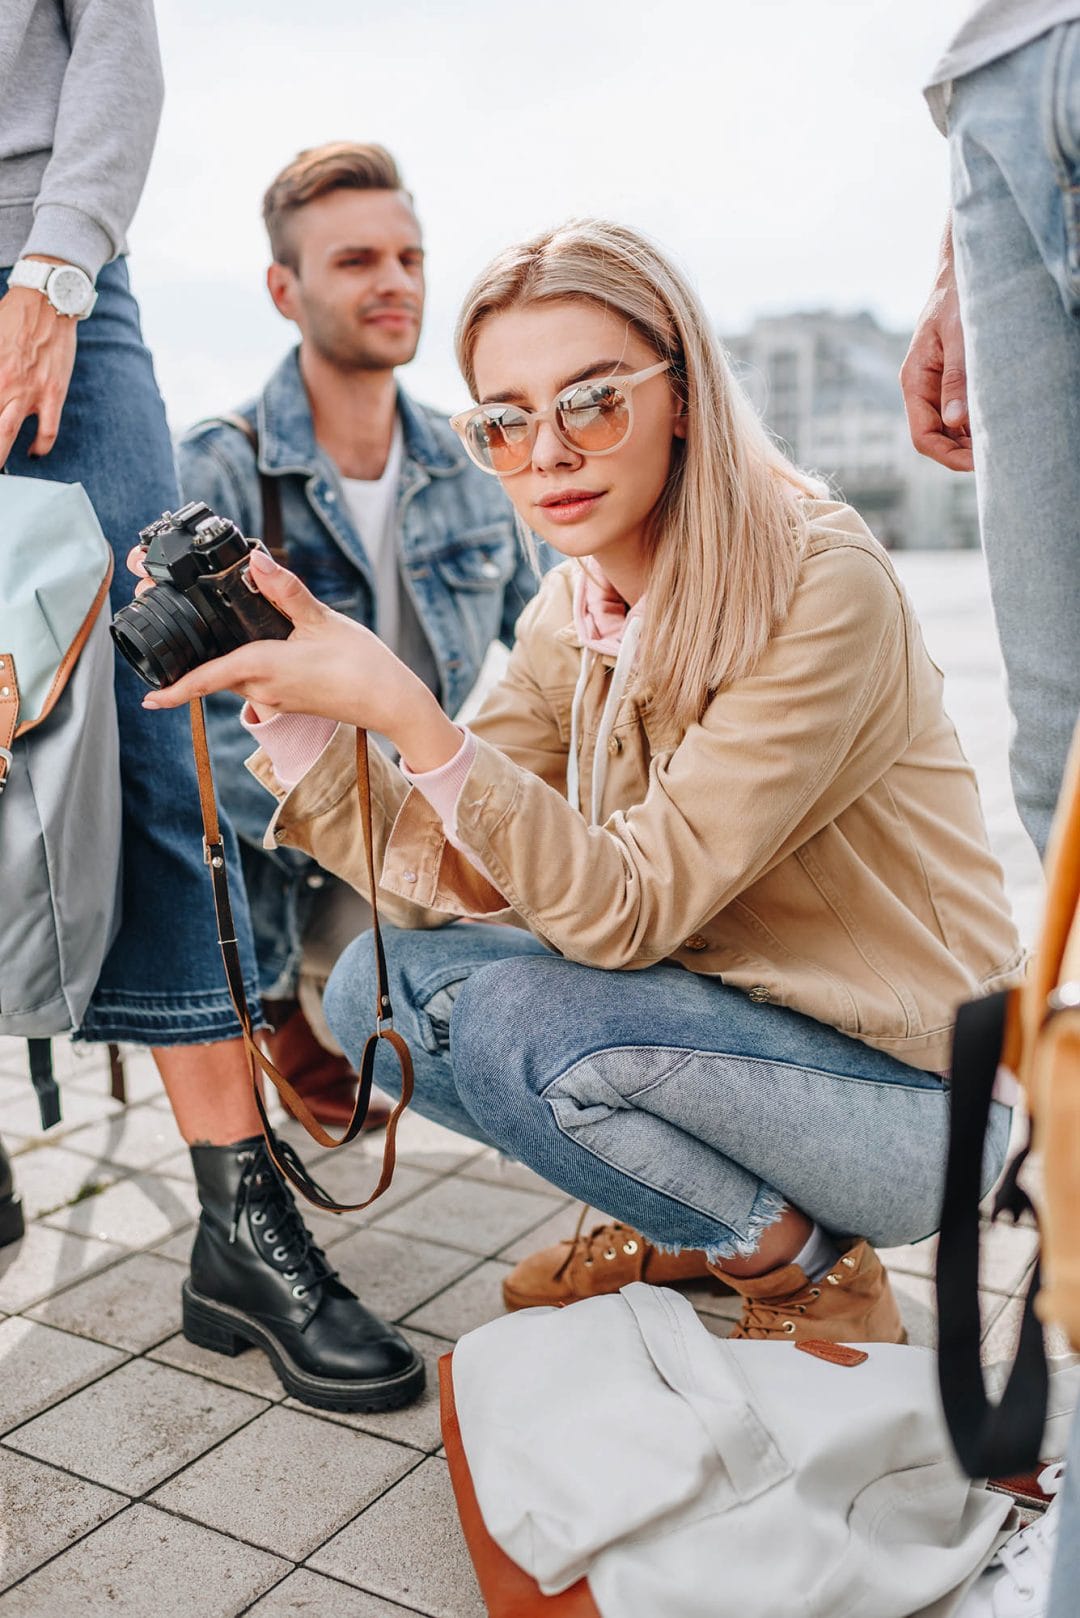 girl sunglasses crouched crowd camel jacket blonde hair blue jeans street photography portrait city people camera subject light how to tutorial guide